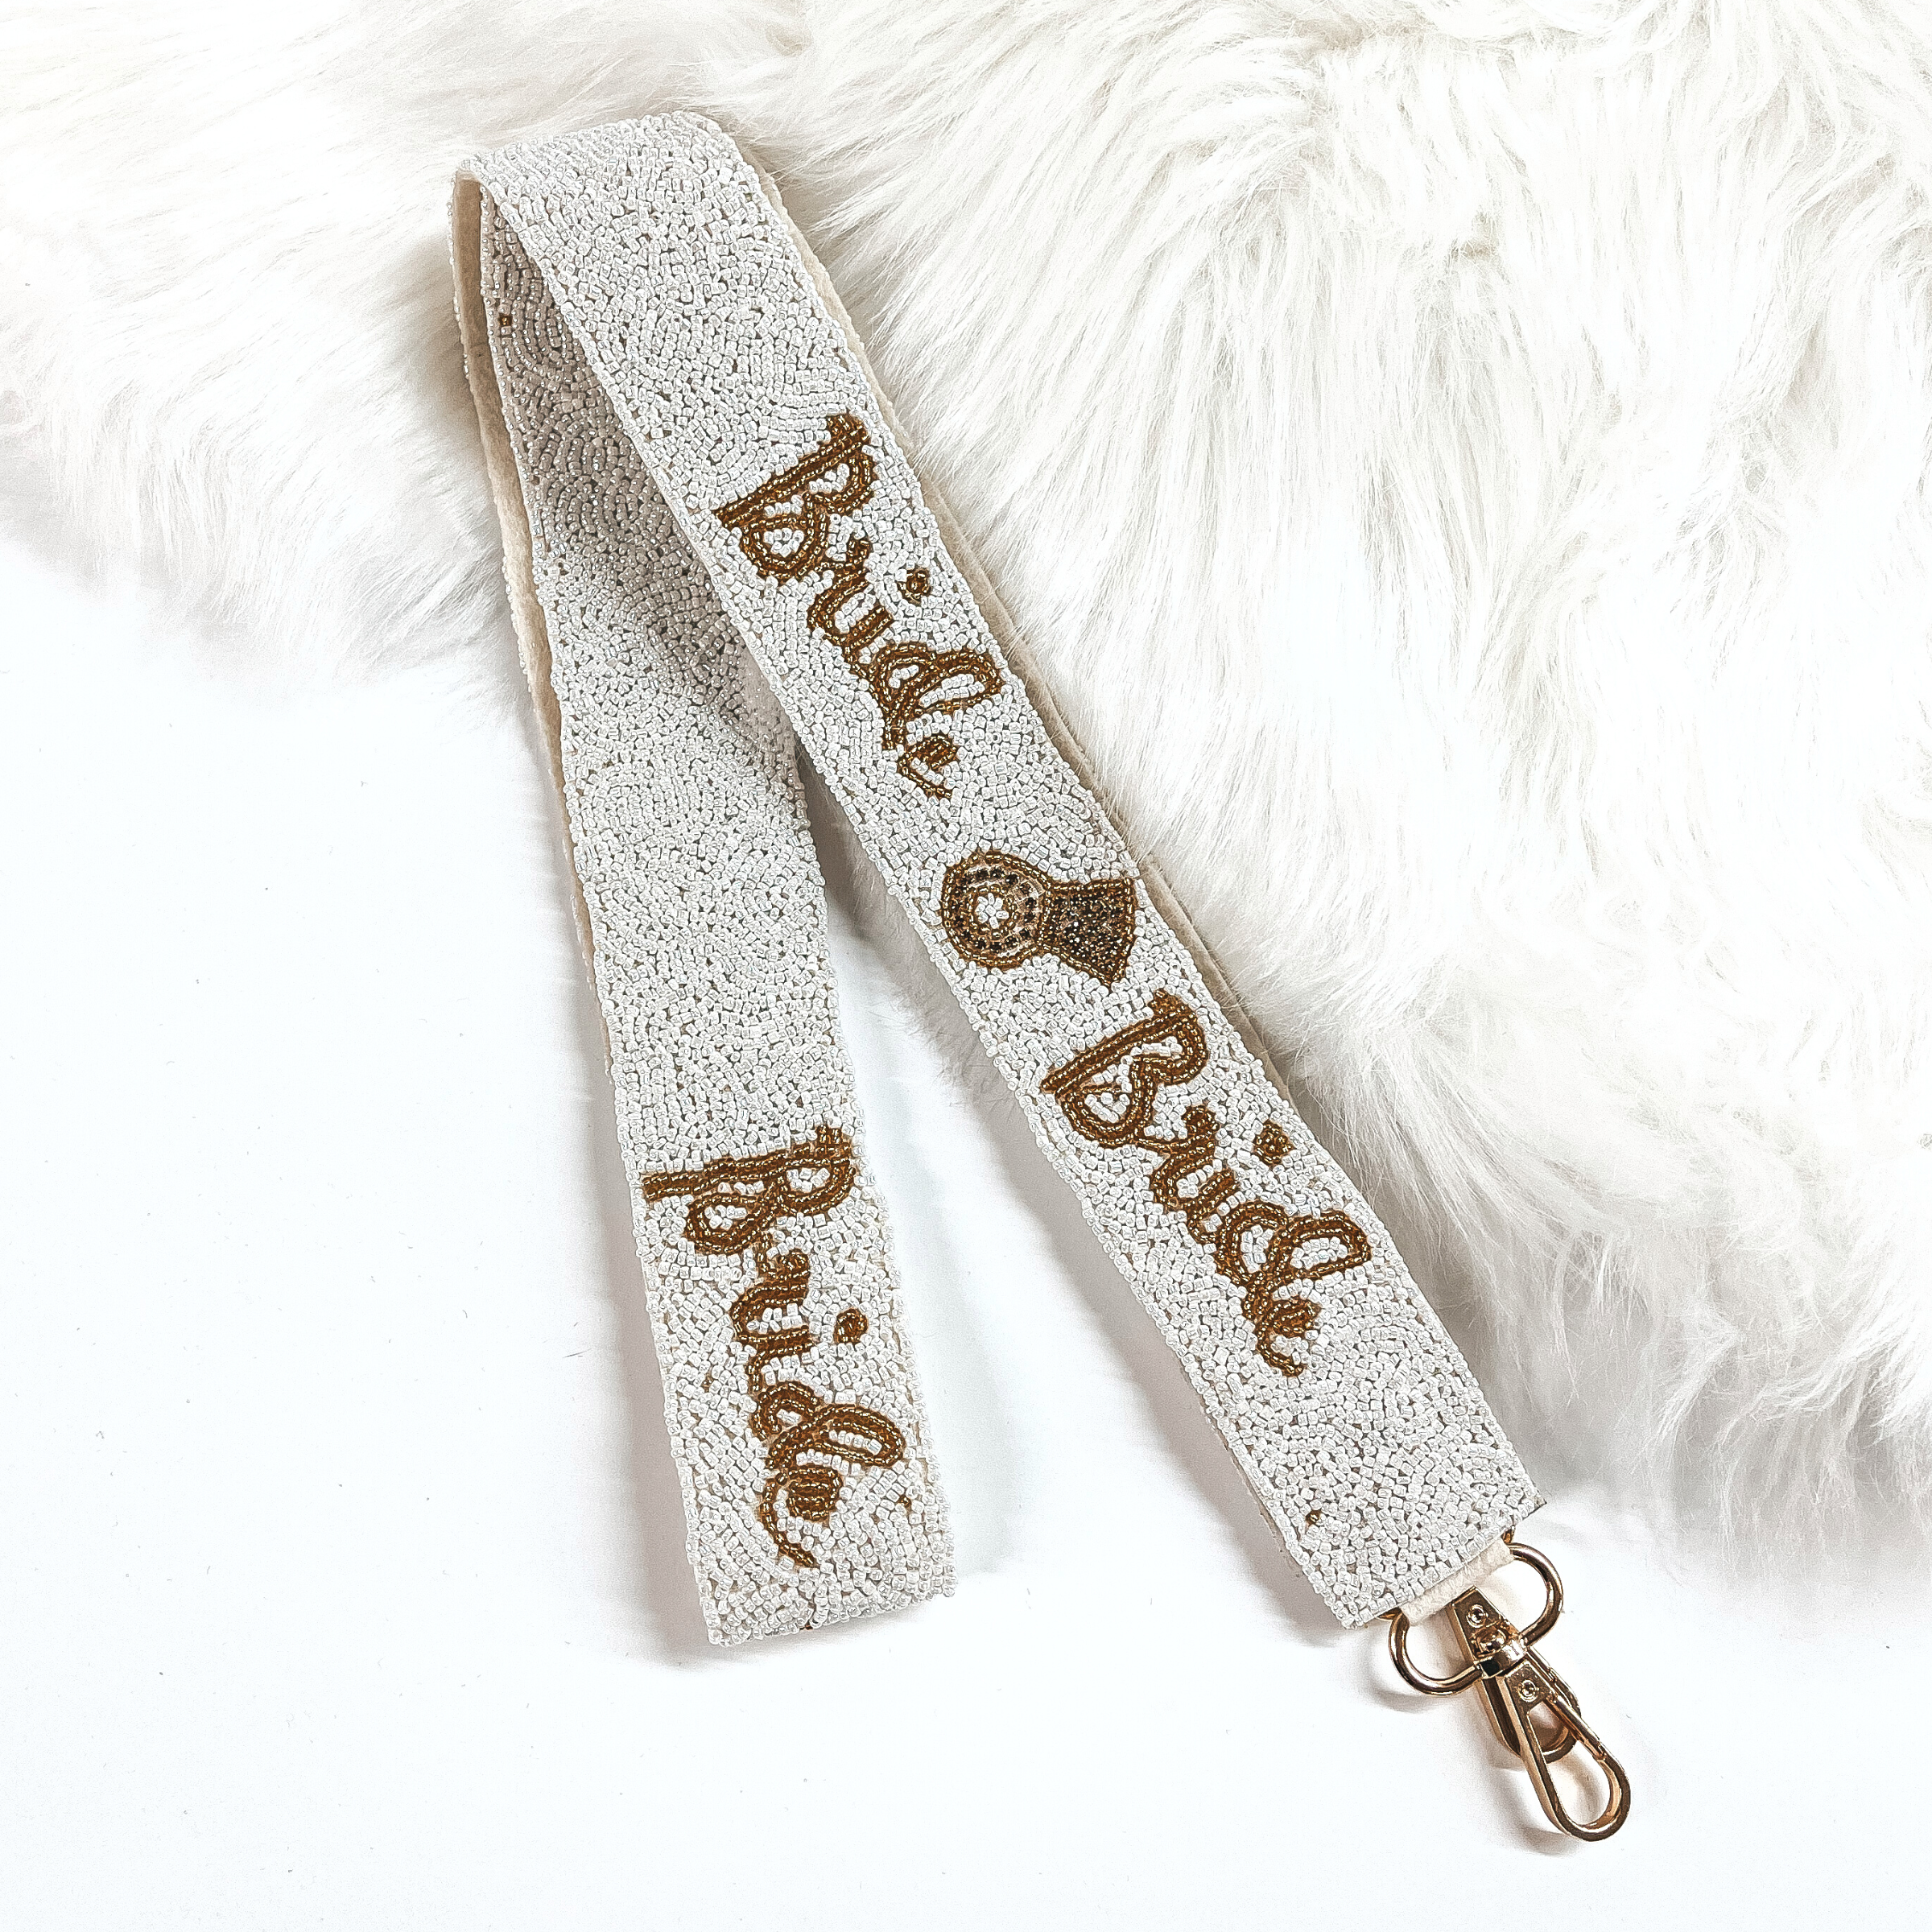 This is a white beaded purse strap that say's 'Bride' with an engagement ring in gold. This purse strap is taken on white background and on white fur.